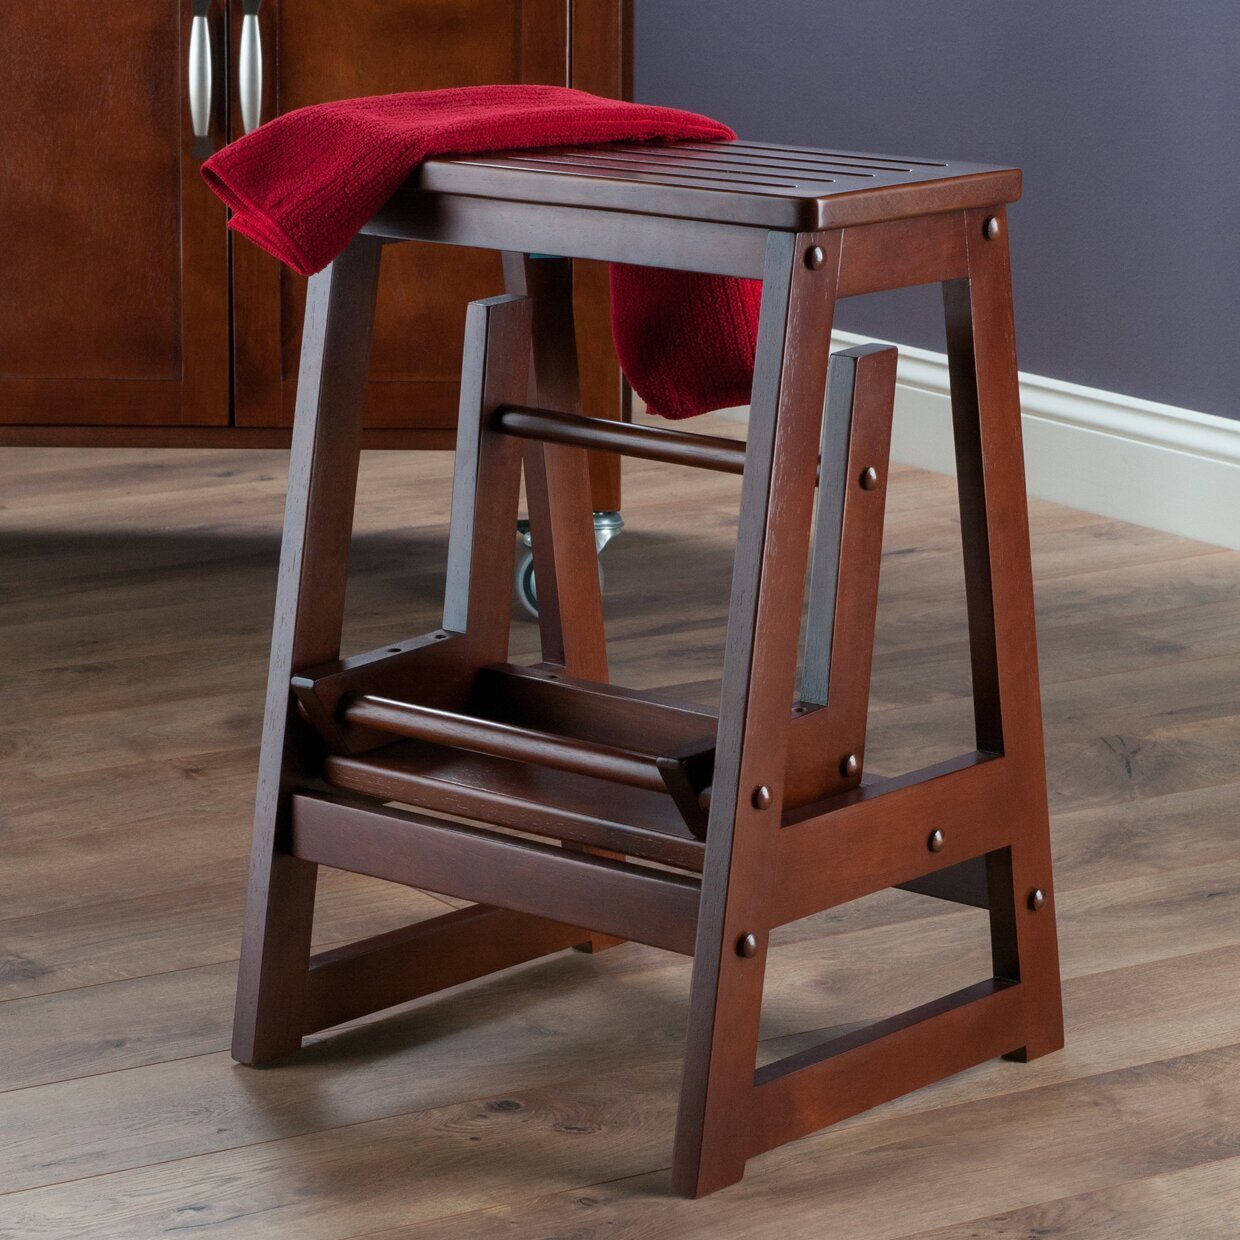 Antique Wooden Step Stool